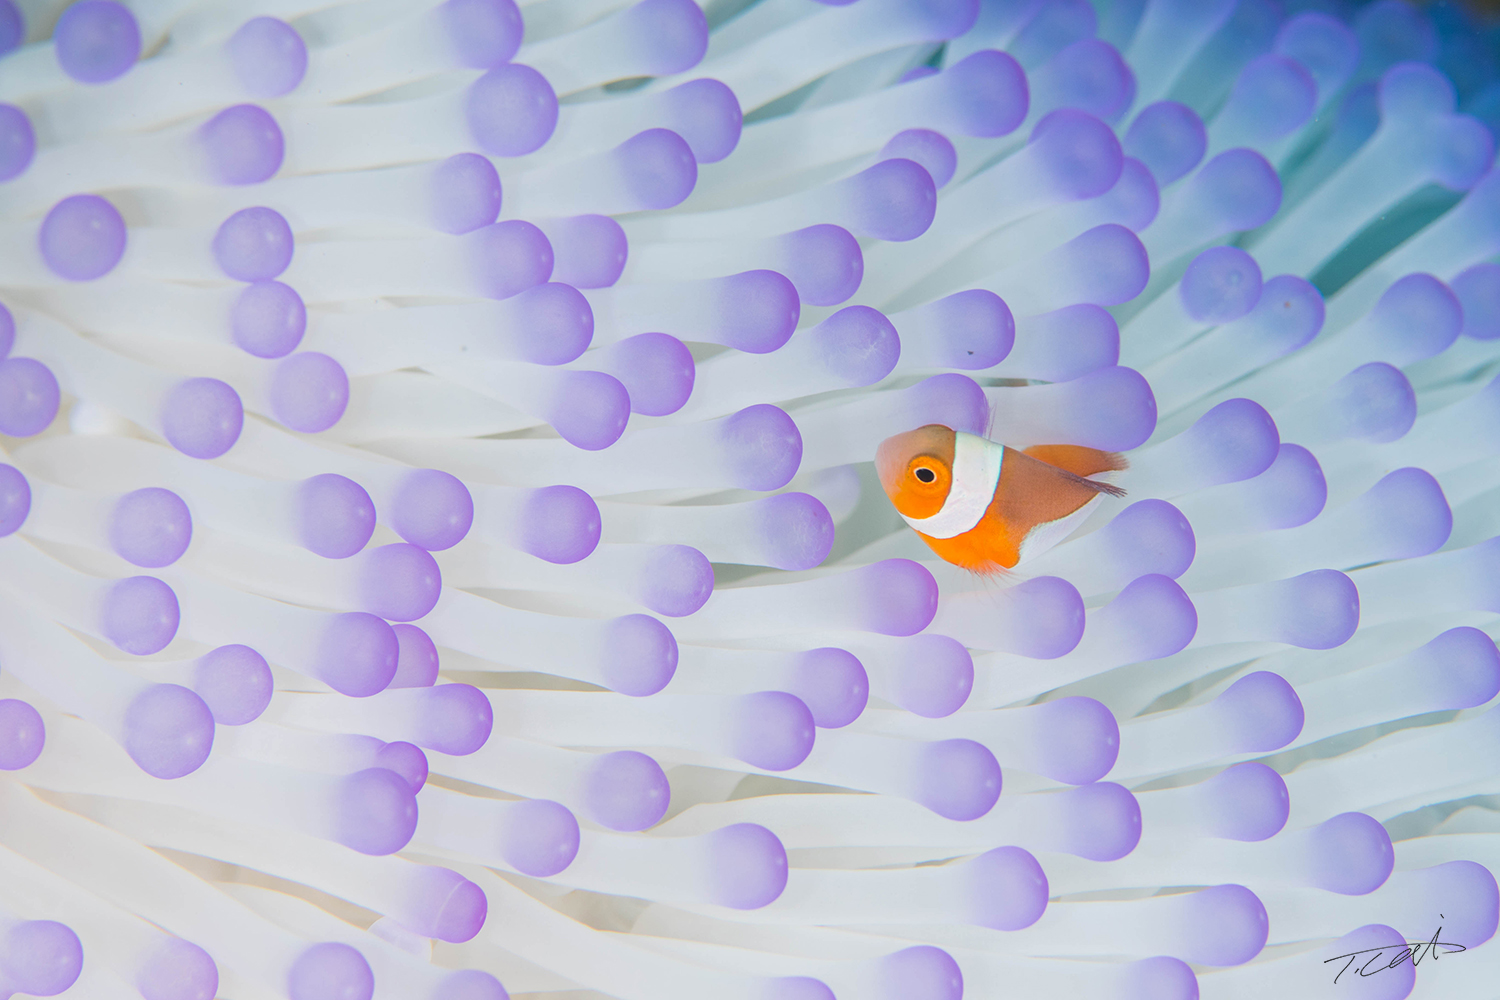 Anemone fish living in the whitened sea anemone.